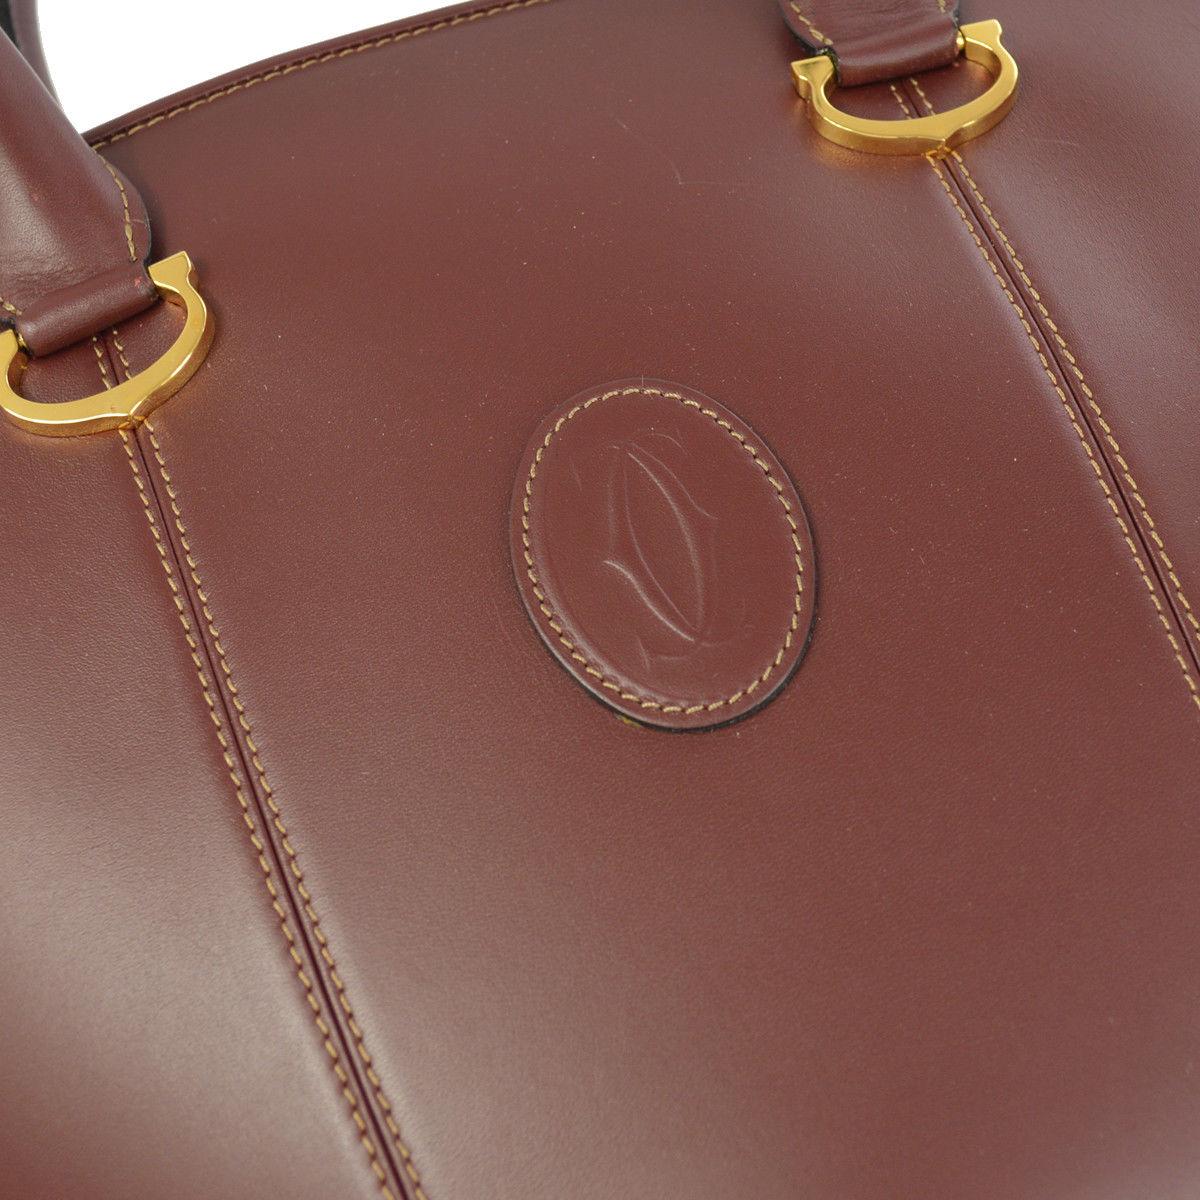 Cartier Burgundy Wine Leather Charm Small Shoulder Bucket Top Handle Satchel Tote Bag in Box

Leather
Gold tone hardware
Woven lining
Zipper closure
Made in Italy
Handle drop 6